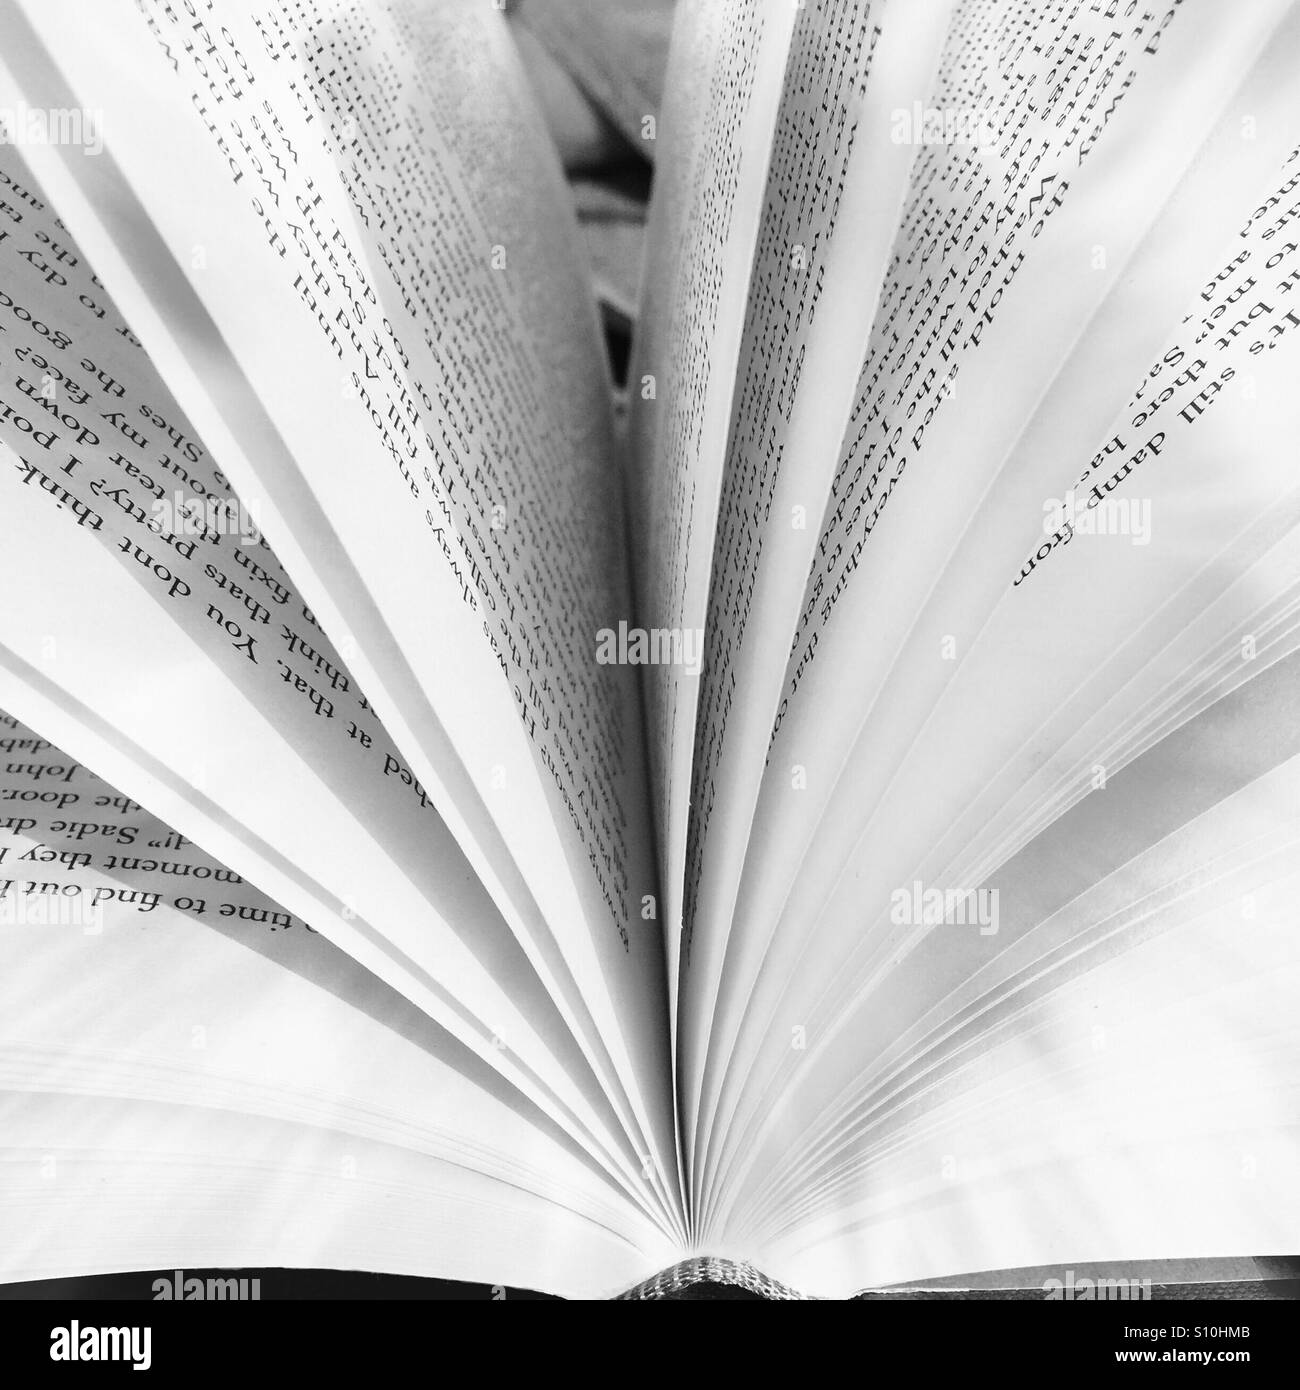 Looking through the pages of a book Stock Photo